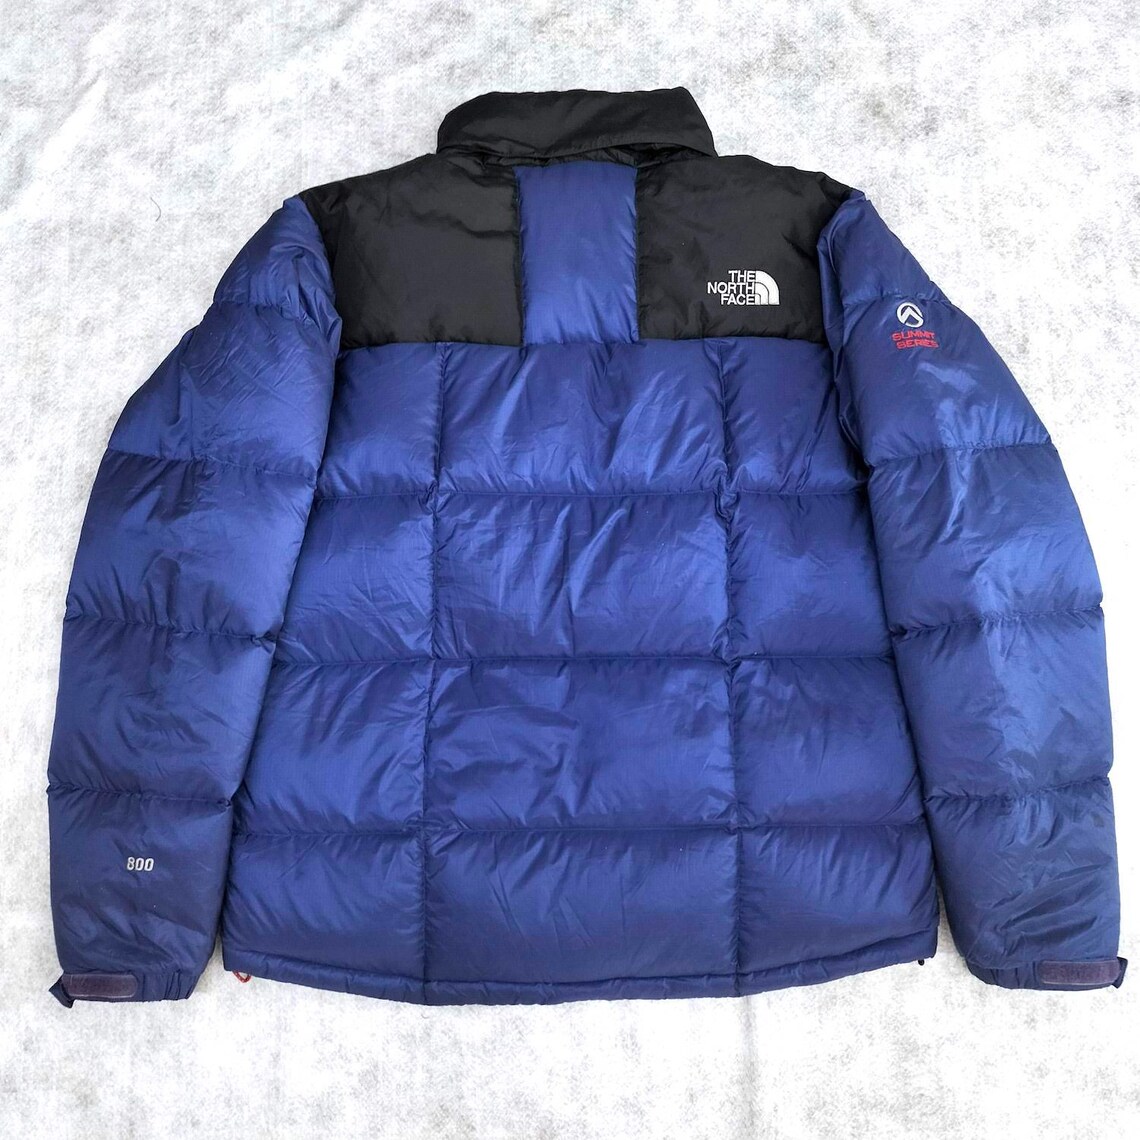 The North Face 800 Summit Series Mens Blue and Black Puffer | Etsy